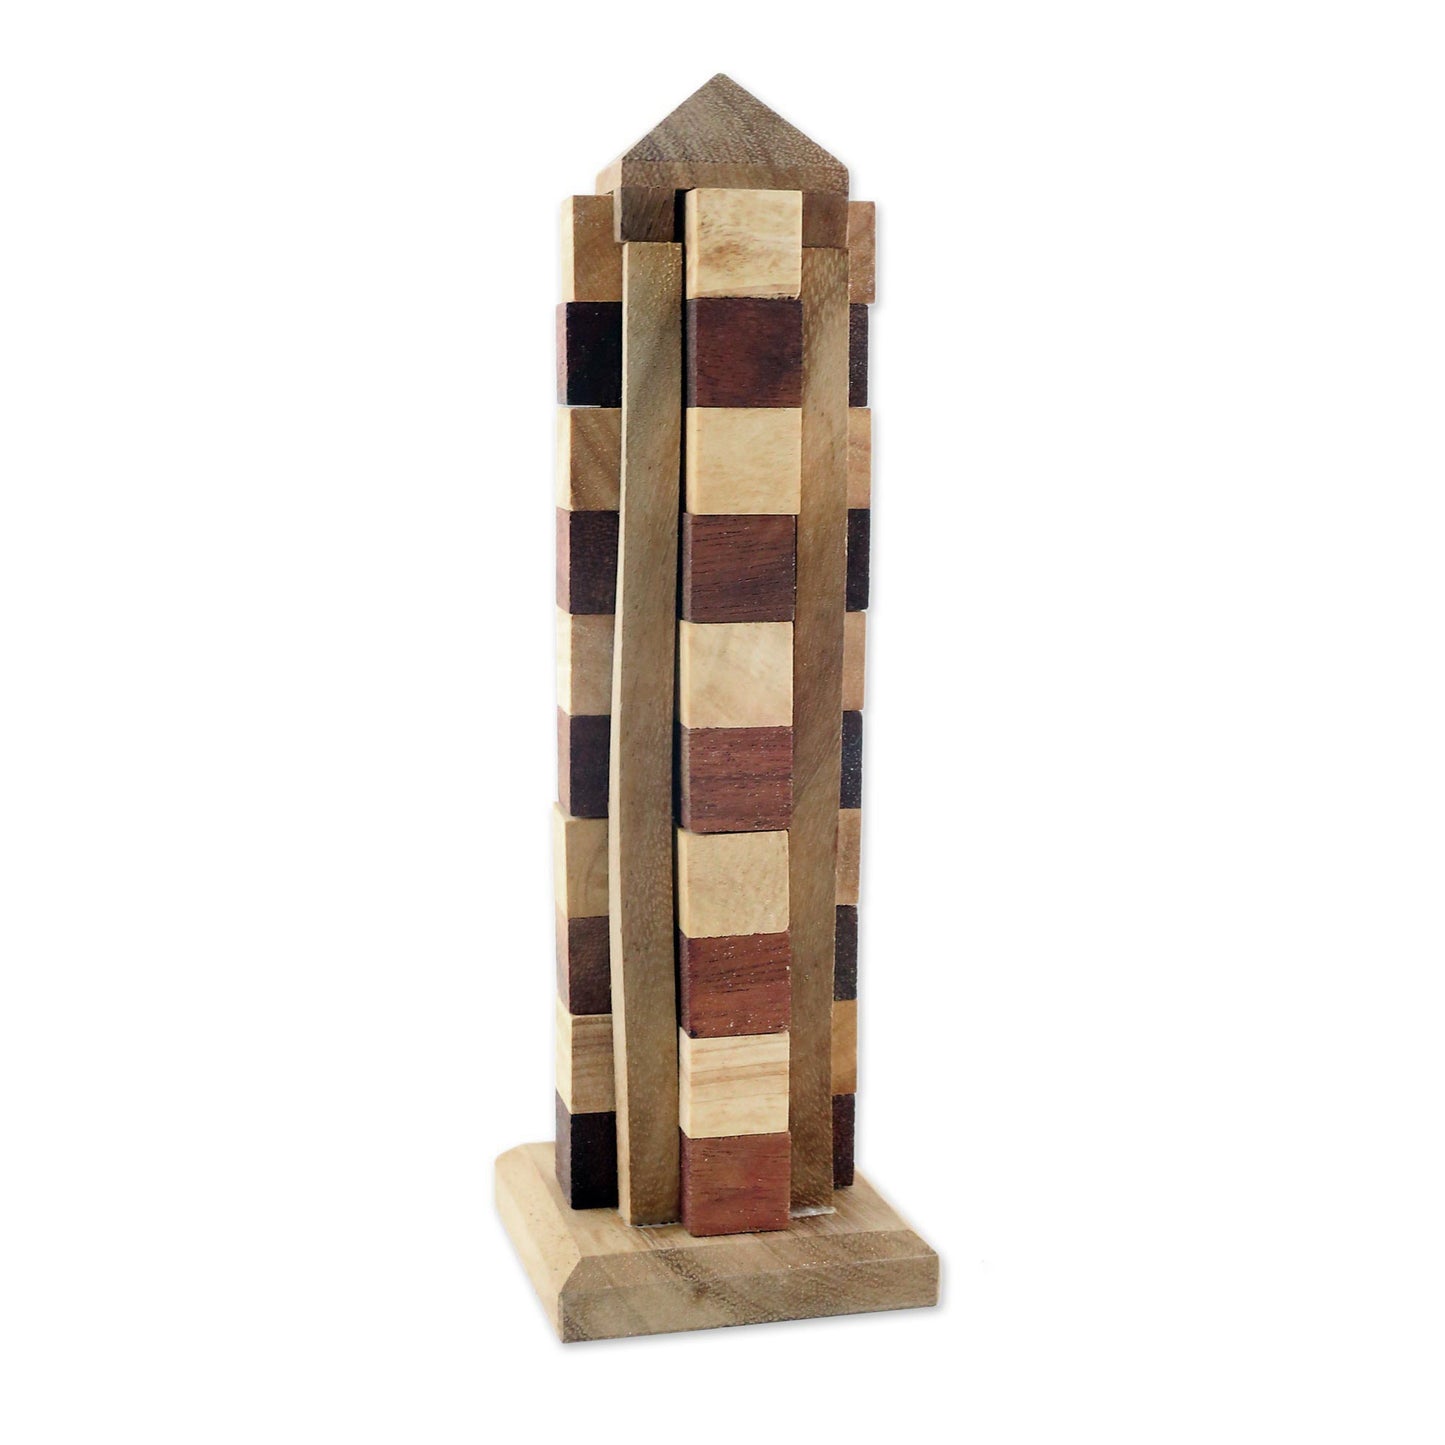 Babylon Tower Hand Made Wood Tower Puzzle Game from Thailand